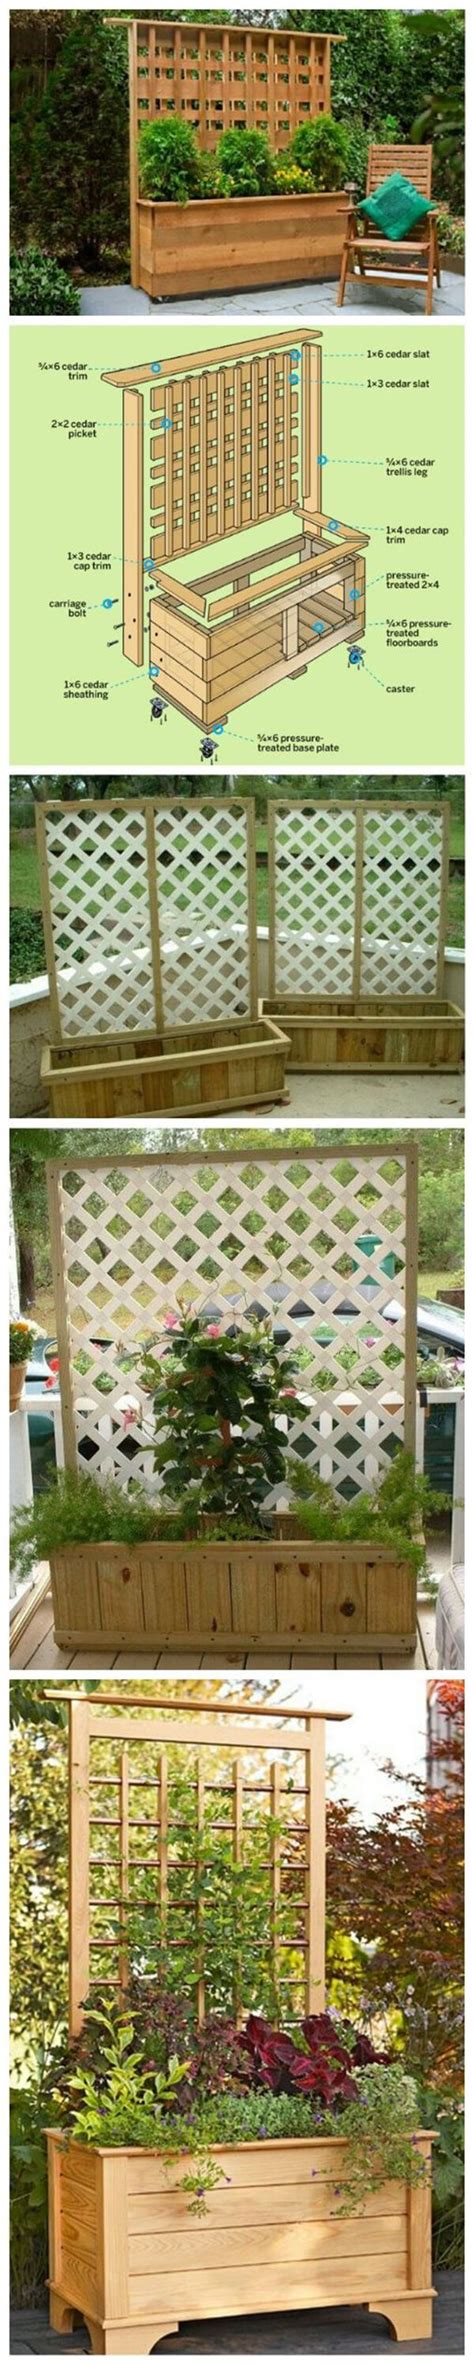 35 Creative DIY Pallet And Wood Planter Box Ideas For Your Garden